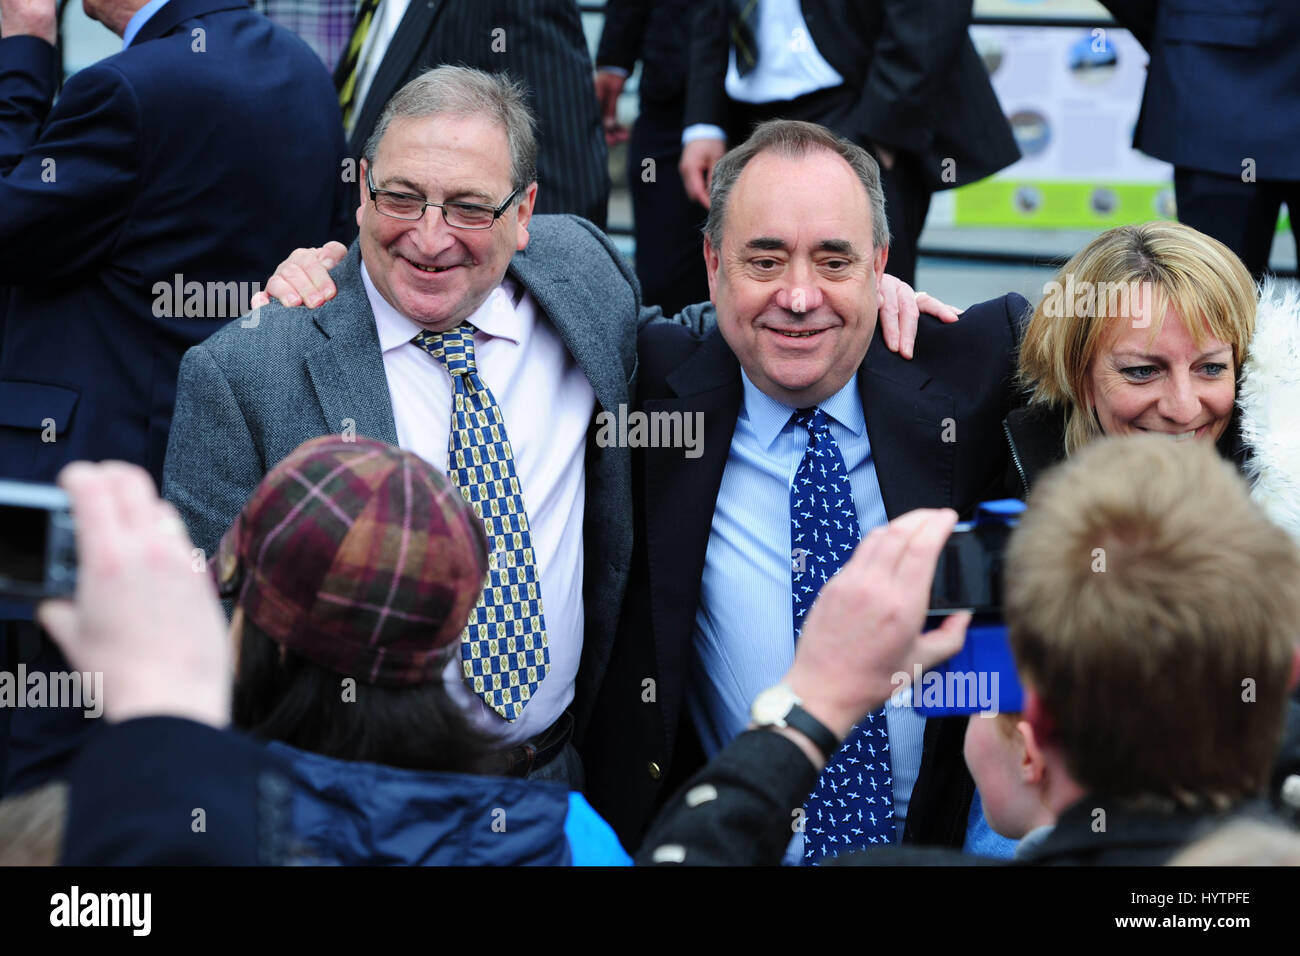 Former SNP leader ALex Salmond (C), now elected as an SNP MP, poses for photographs at an SNP event in South Queensferry Stock Photo